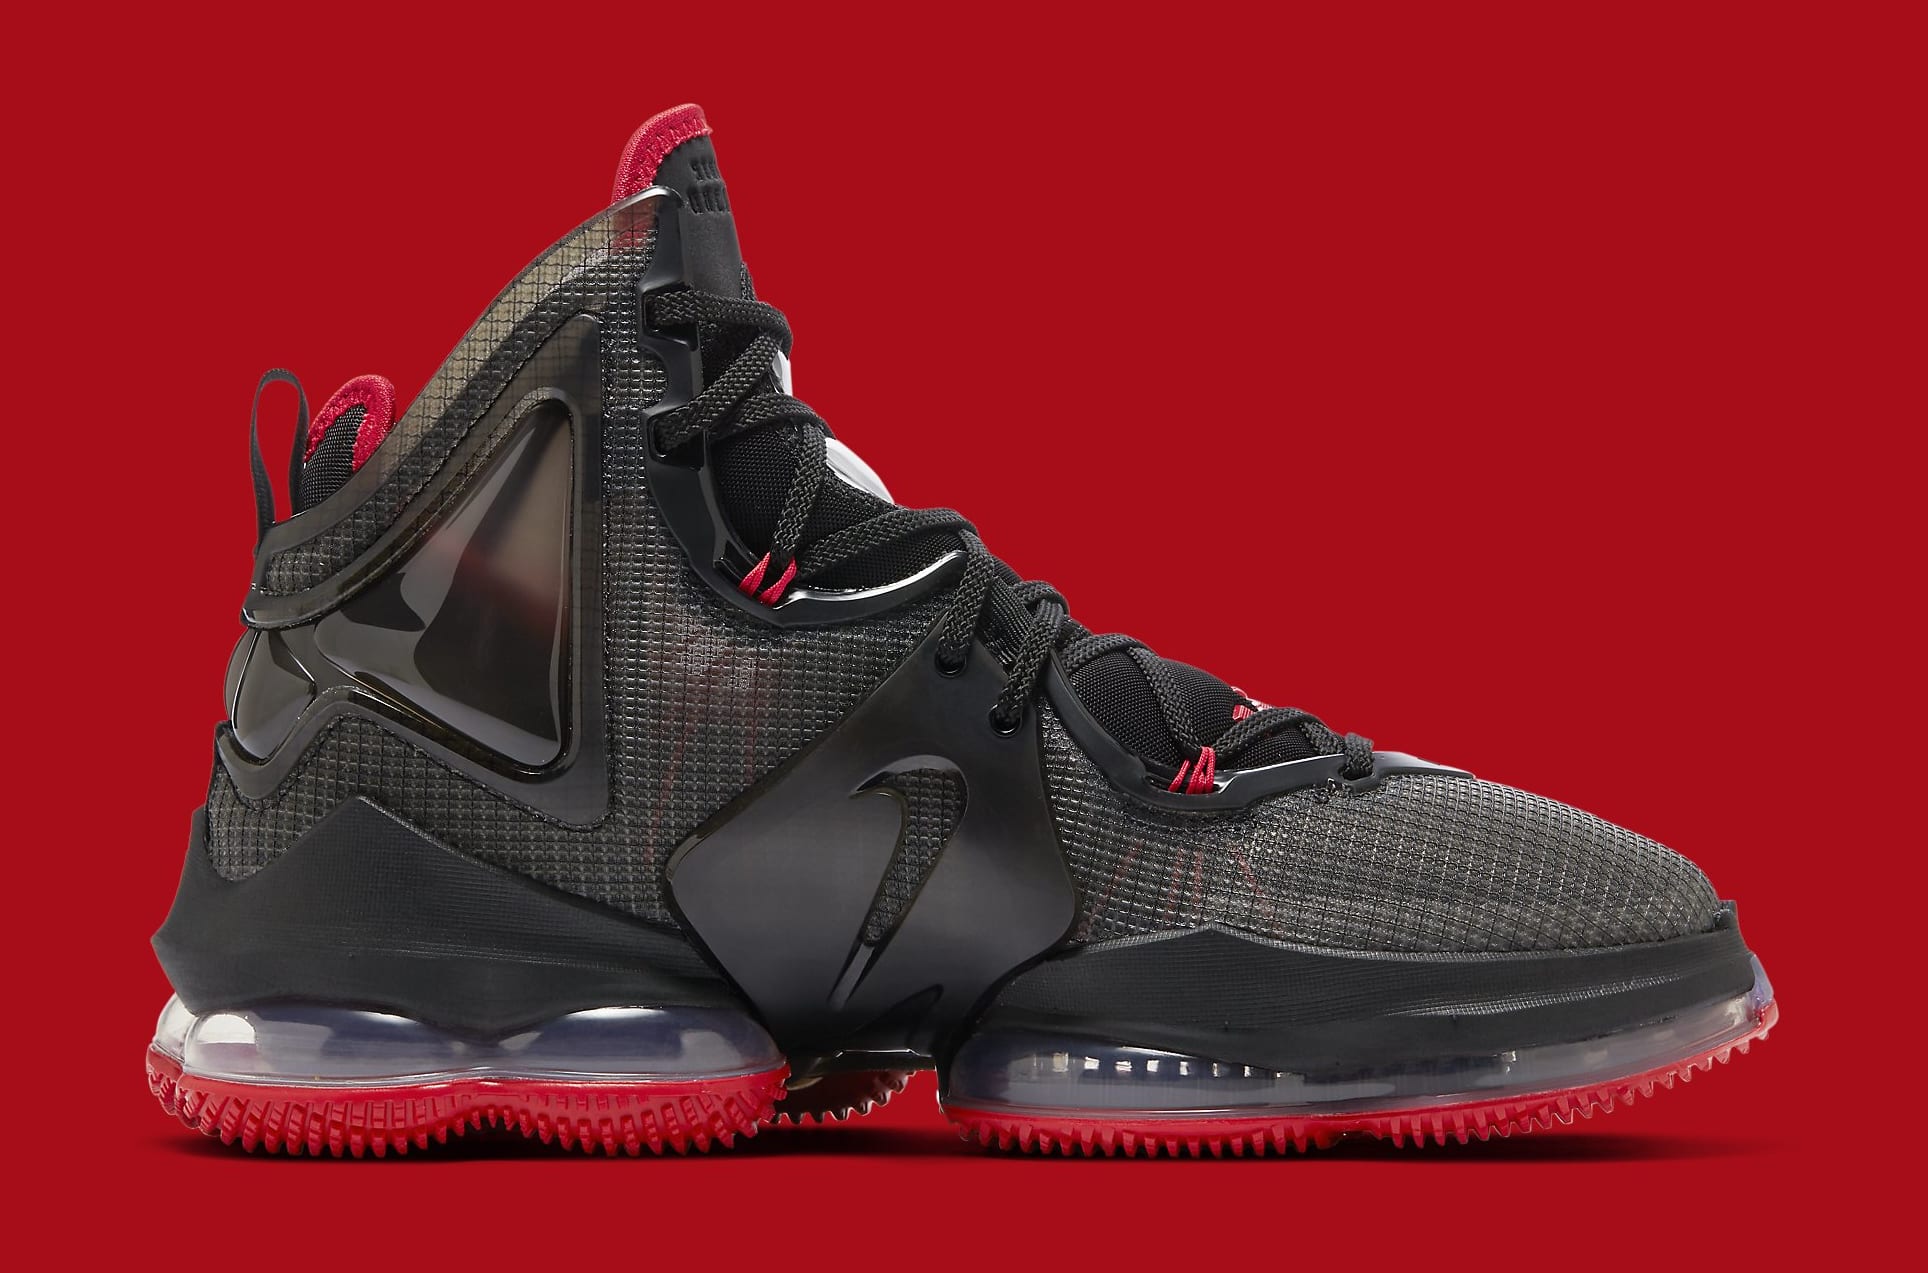 Best Look Yet at the 'Bred' Nike LeBron 19